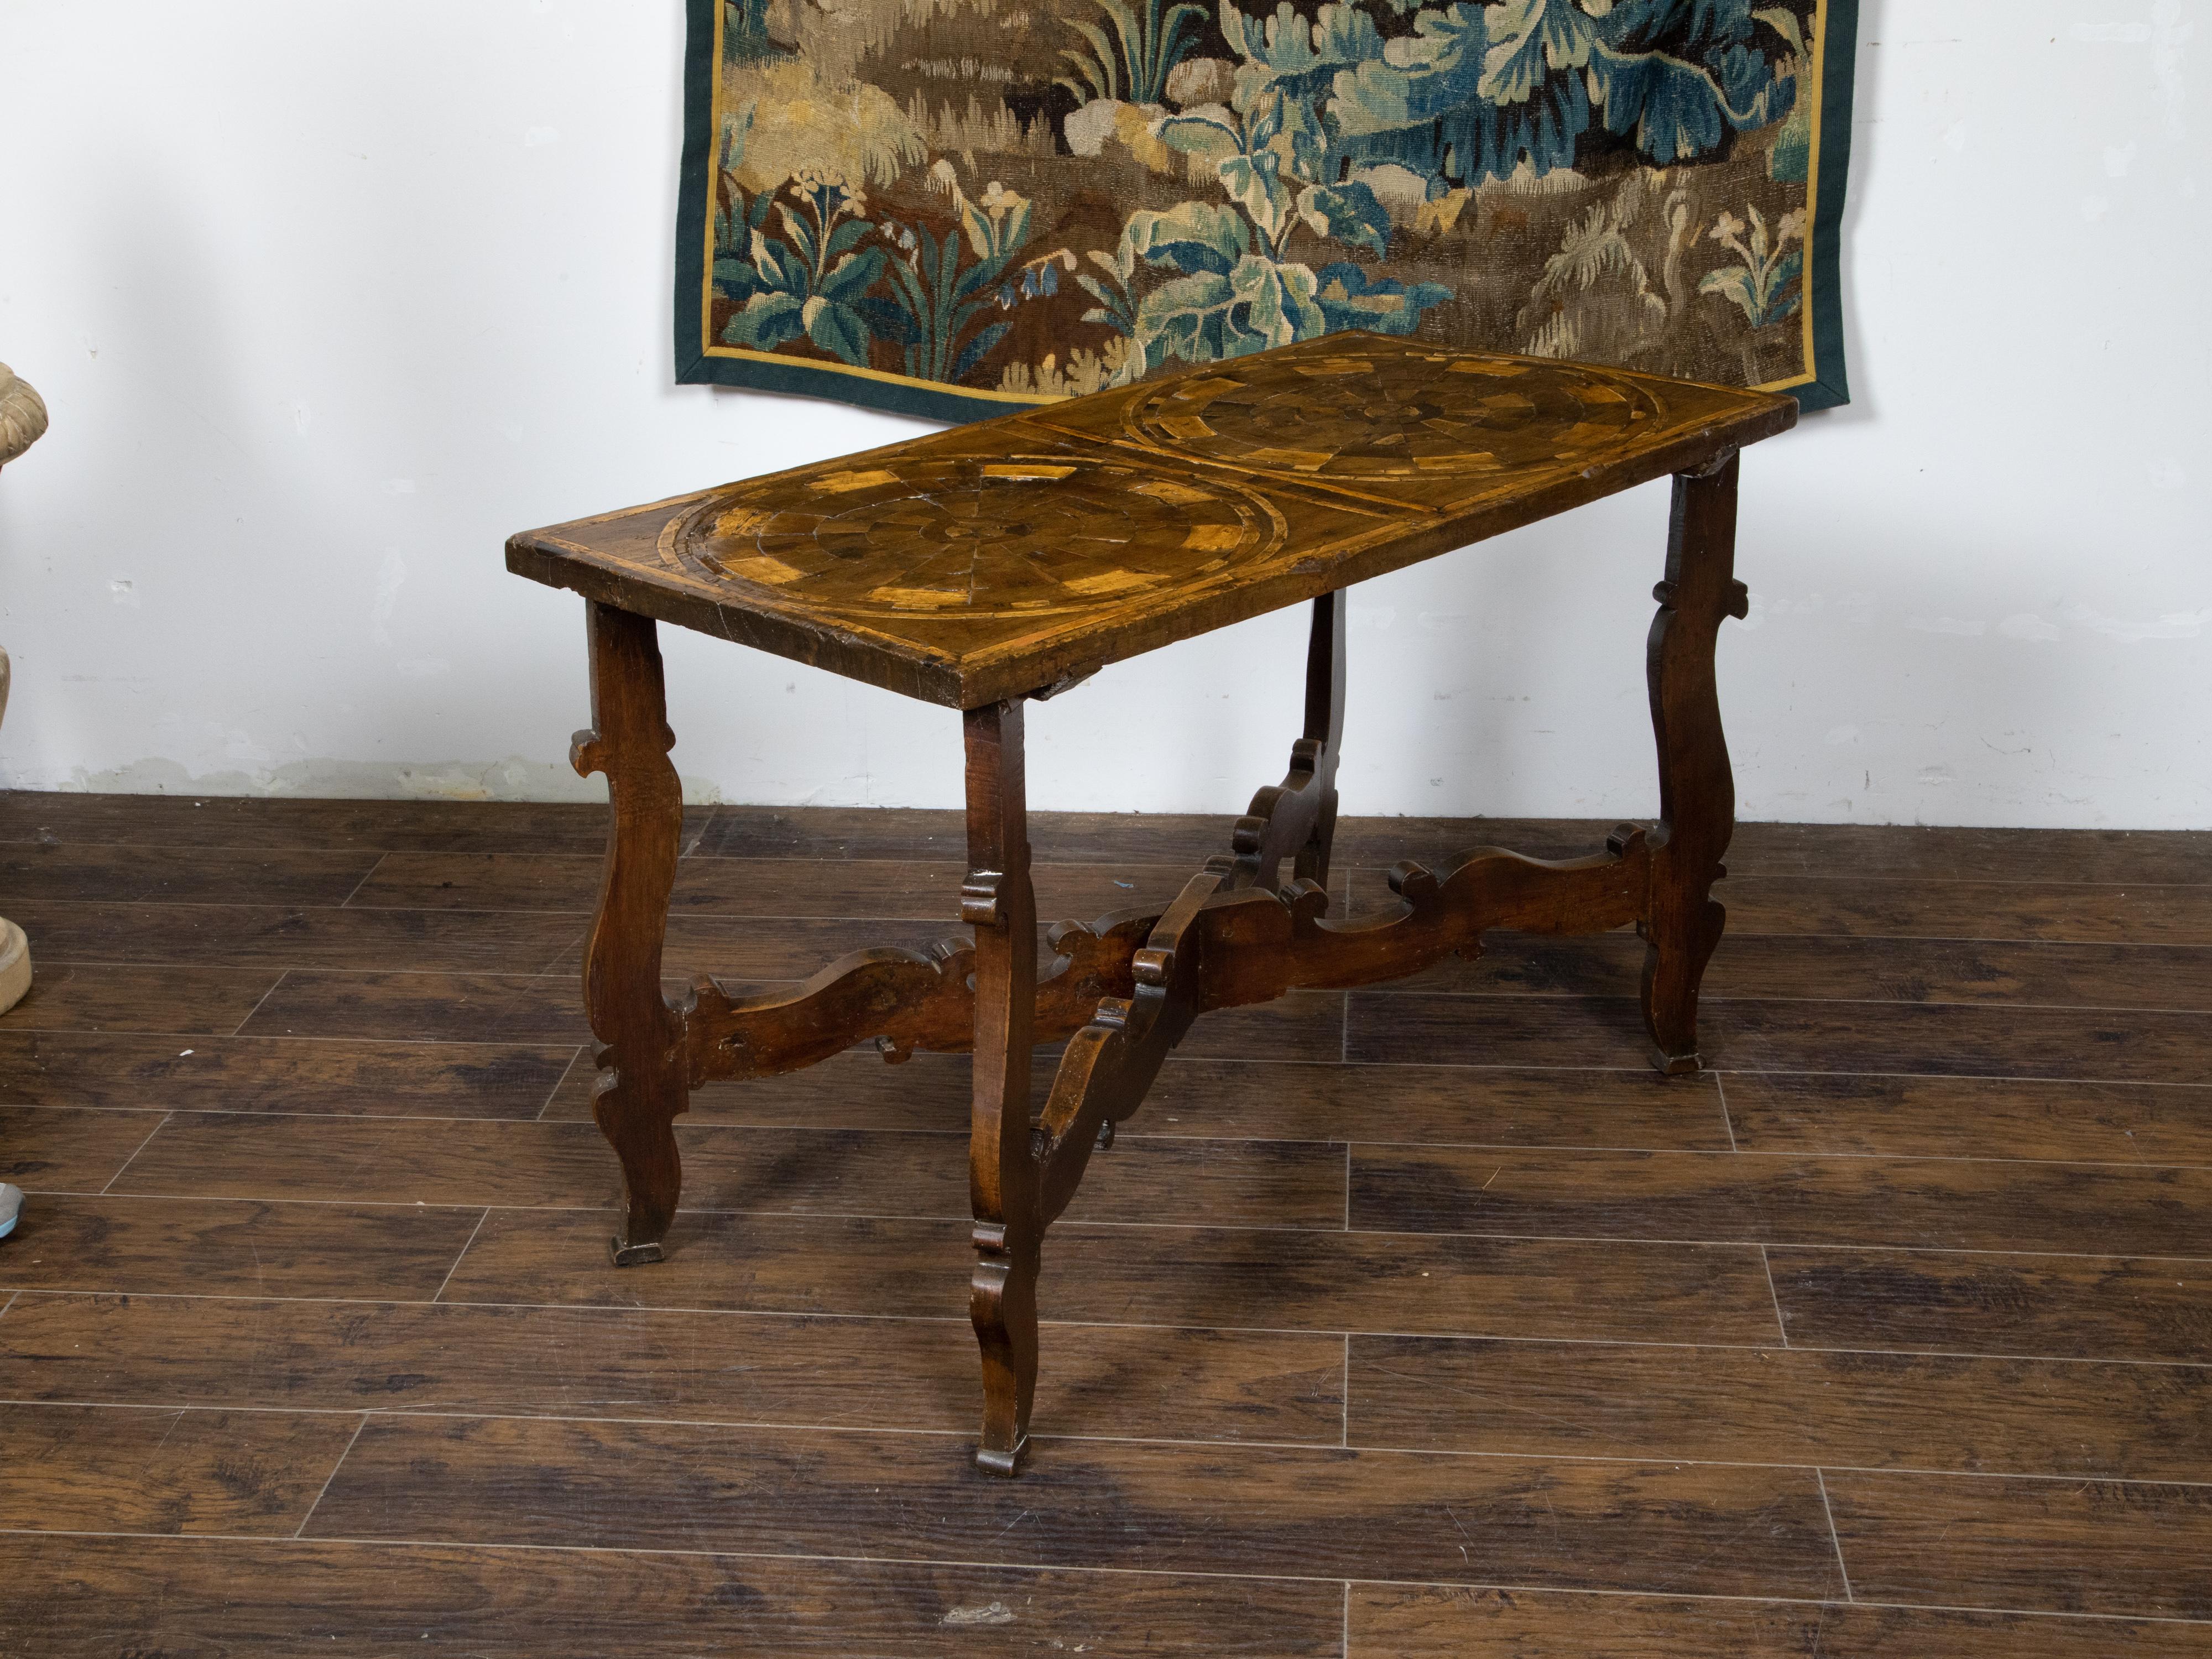 An Italian Baroque style walnut console table from the 18th century, with marquetry geometric top and carved base. Created in Italy during the 18th century, this walnut table draws our immediate attention with its rectangular top adorned with an